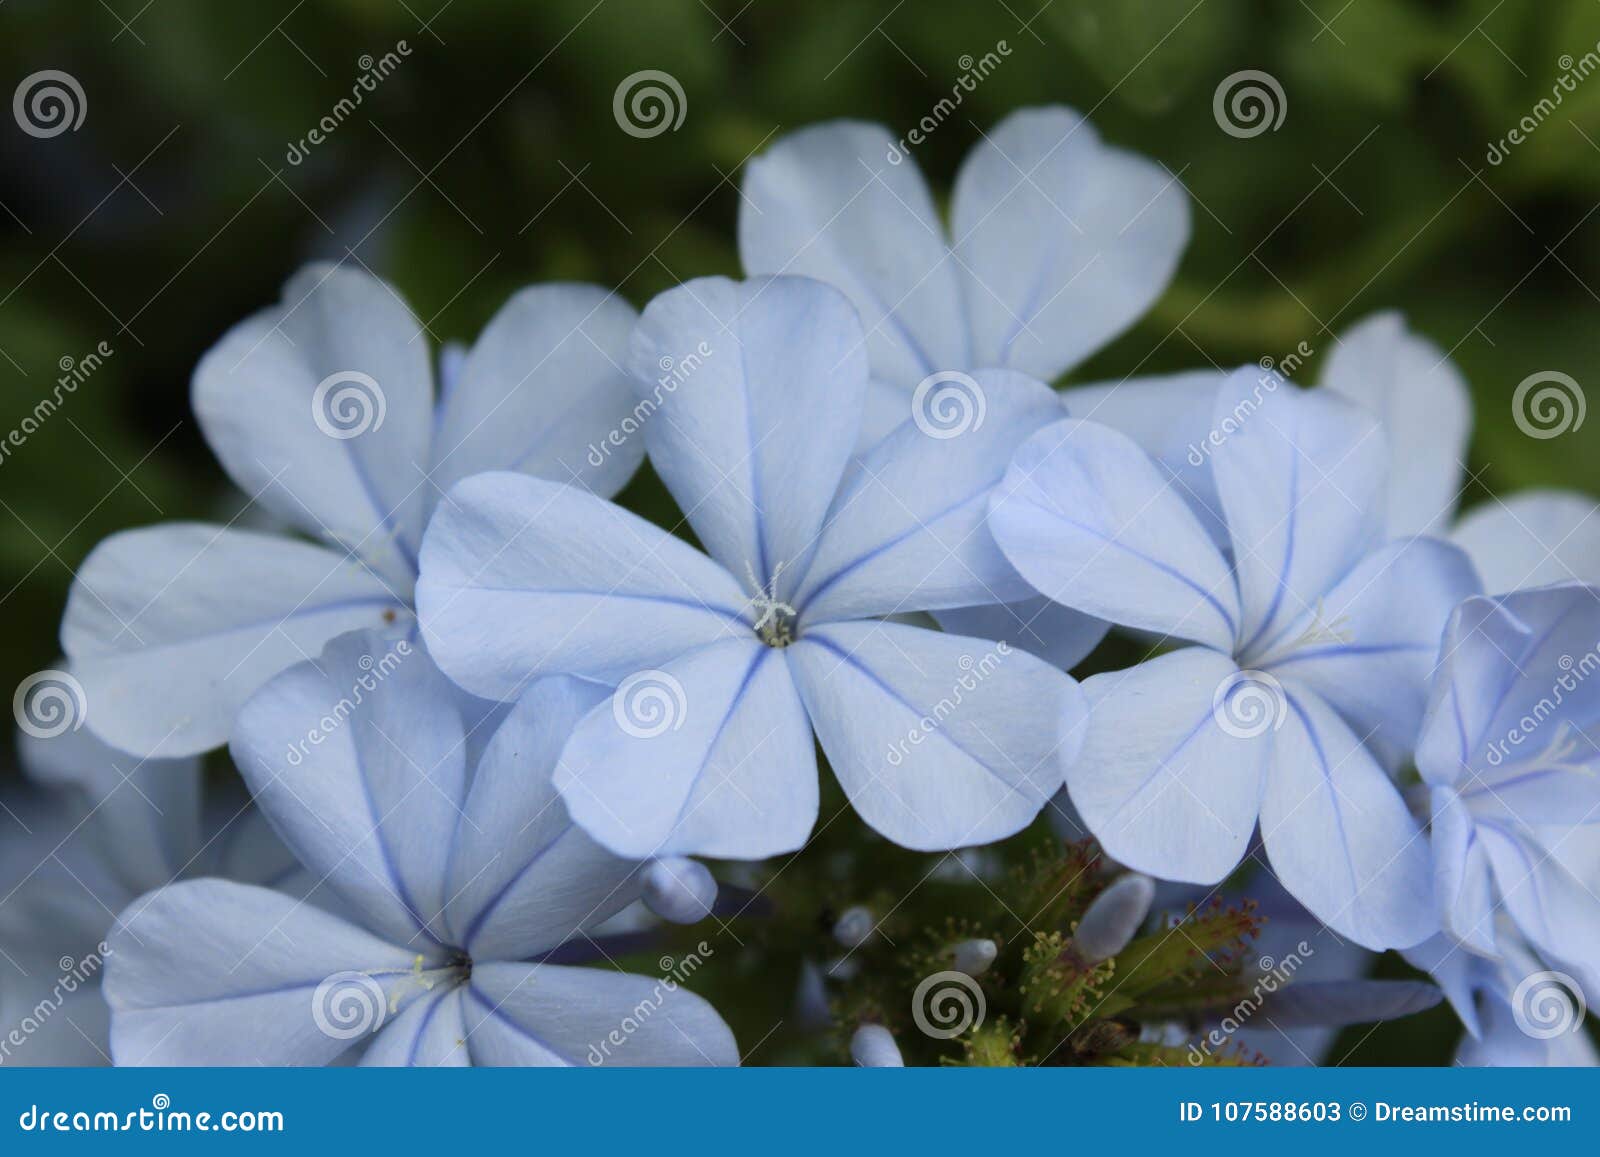 blue small flowers